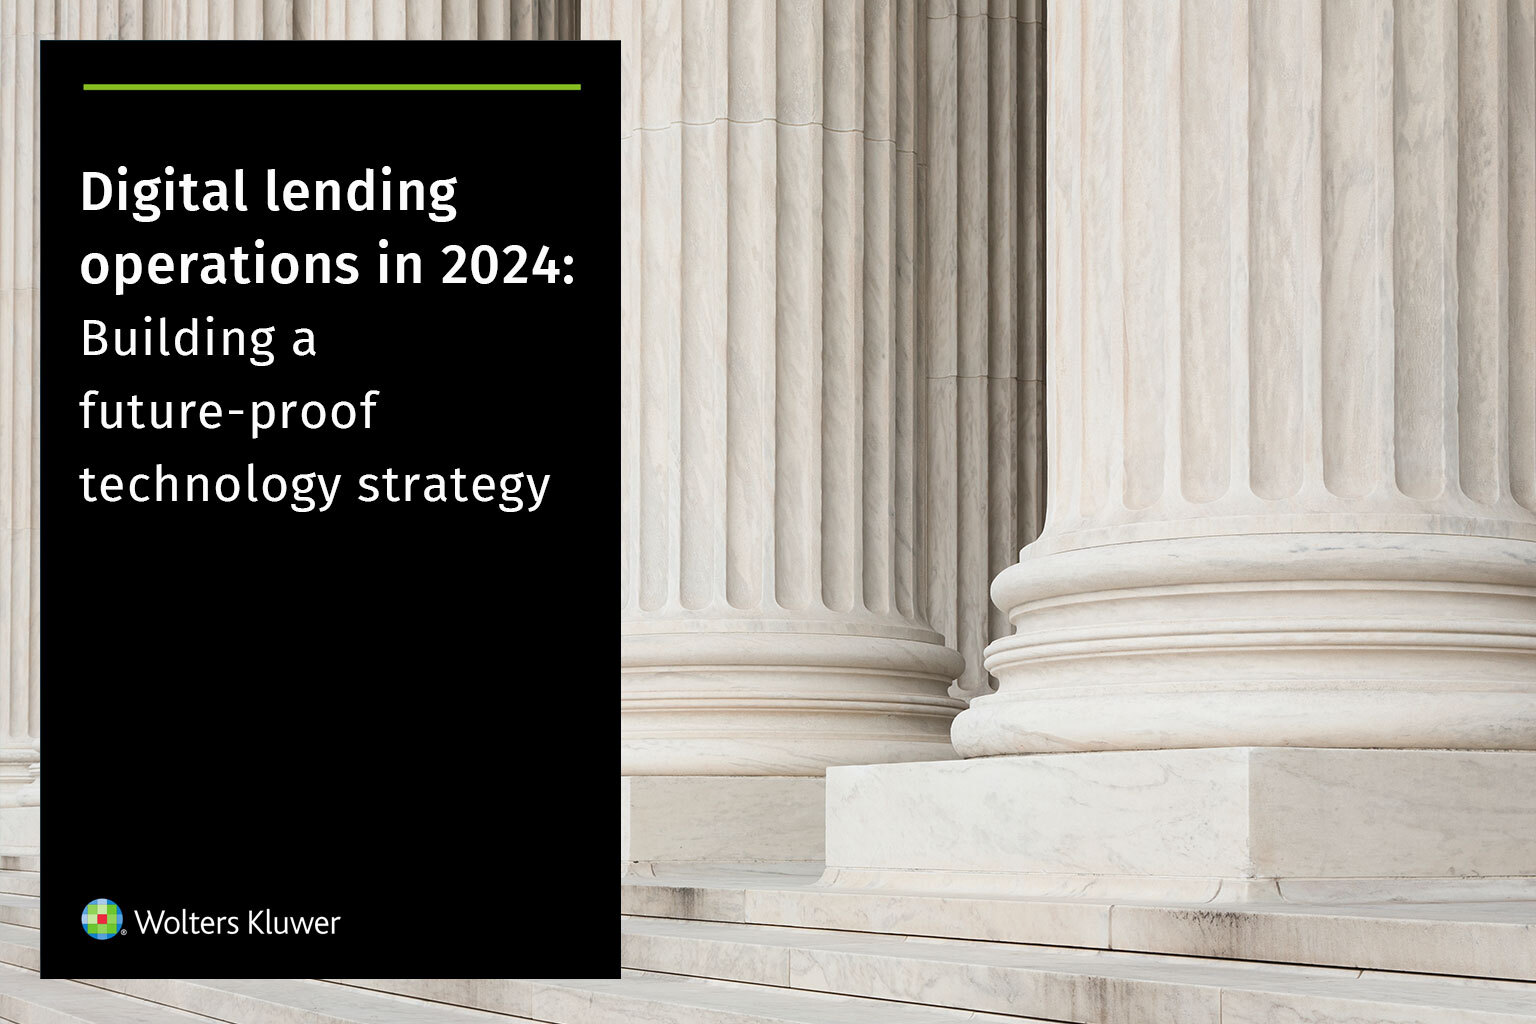 Digital lending operations in 2024: Building a future-proof technology strategy